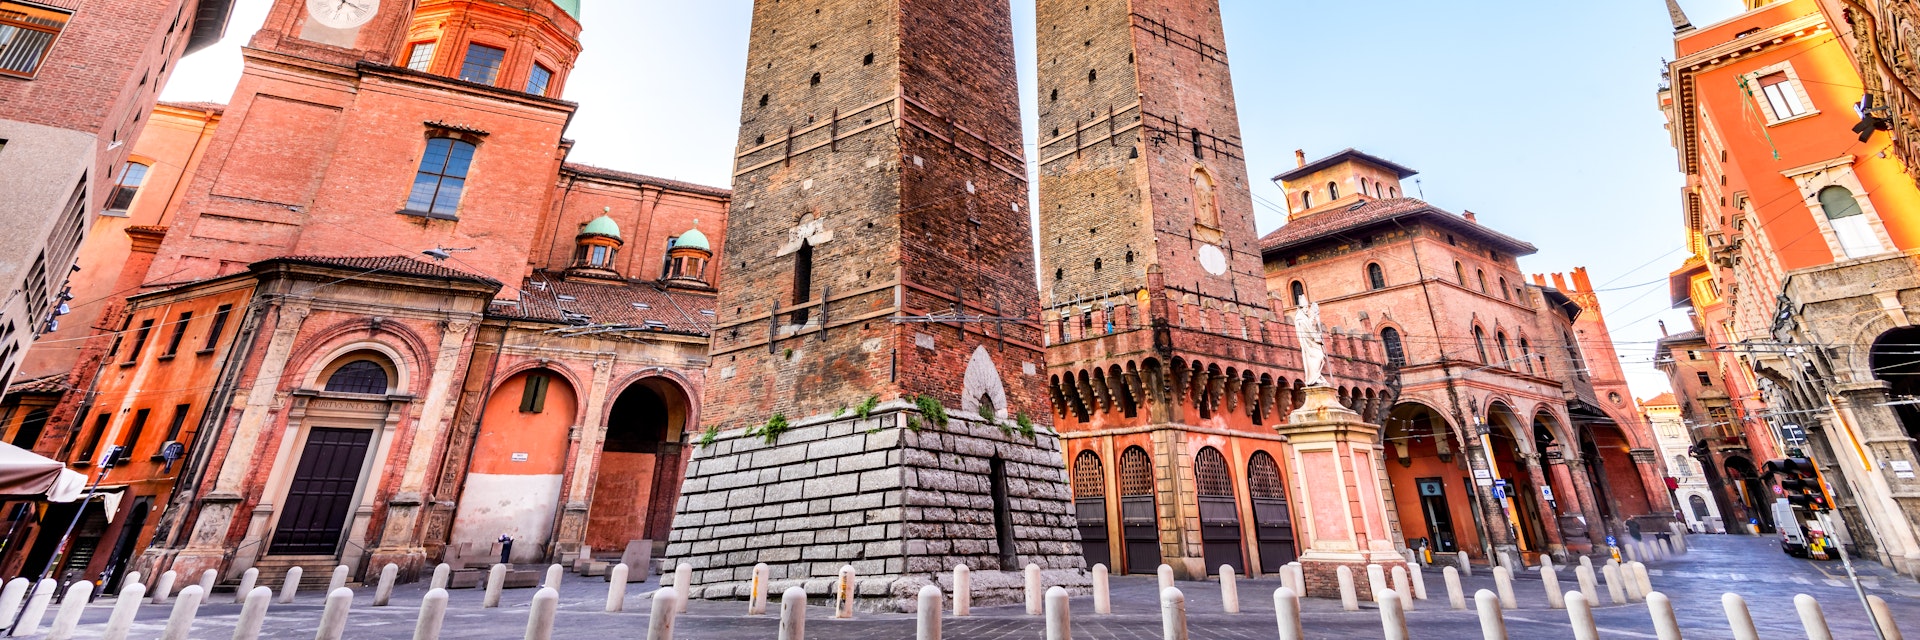 Bologna, Italy - Two Towers (Due Torri), Asinelli and Garisenda, symbols of medieval Bologna towers.
814346692